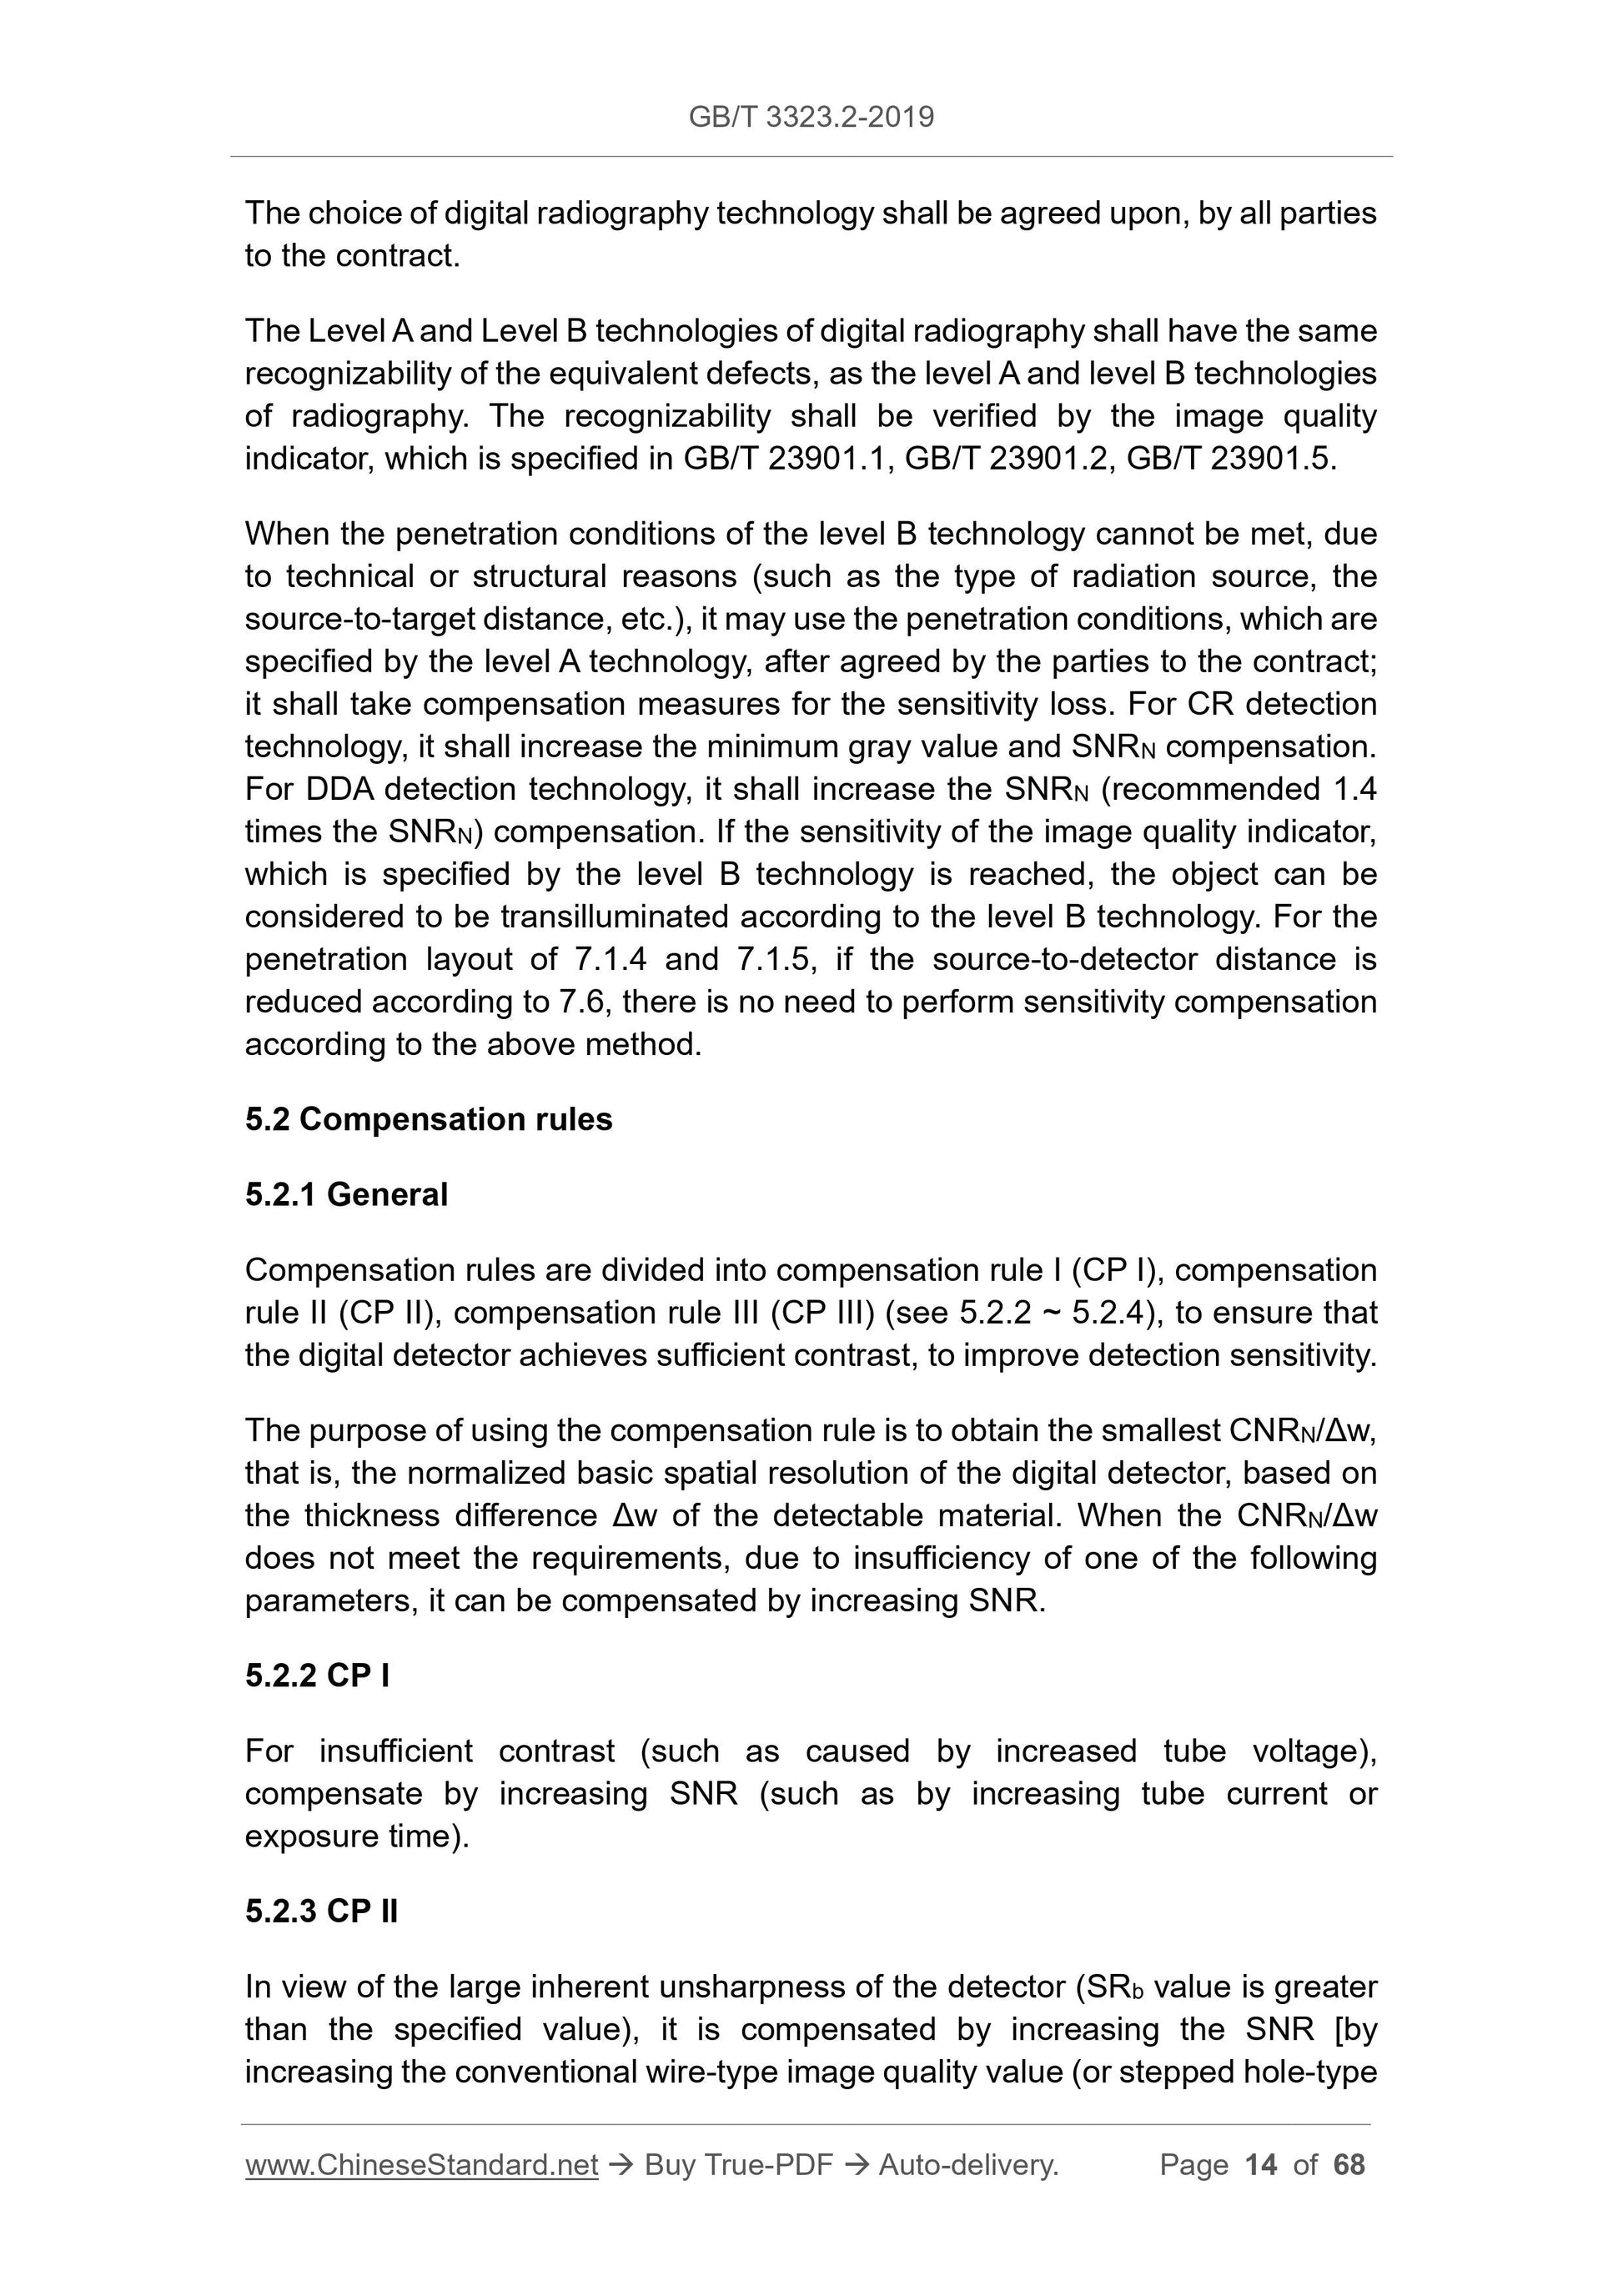 GB/T 3323.2-2019 Page 4